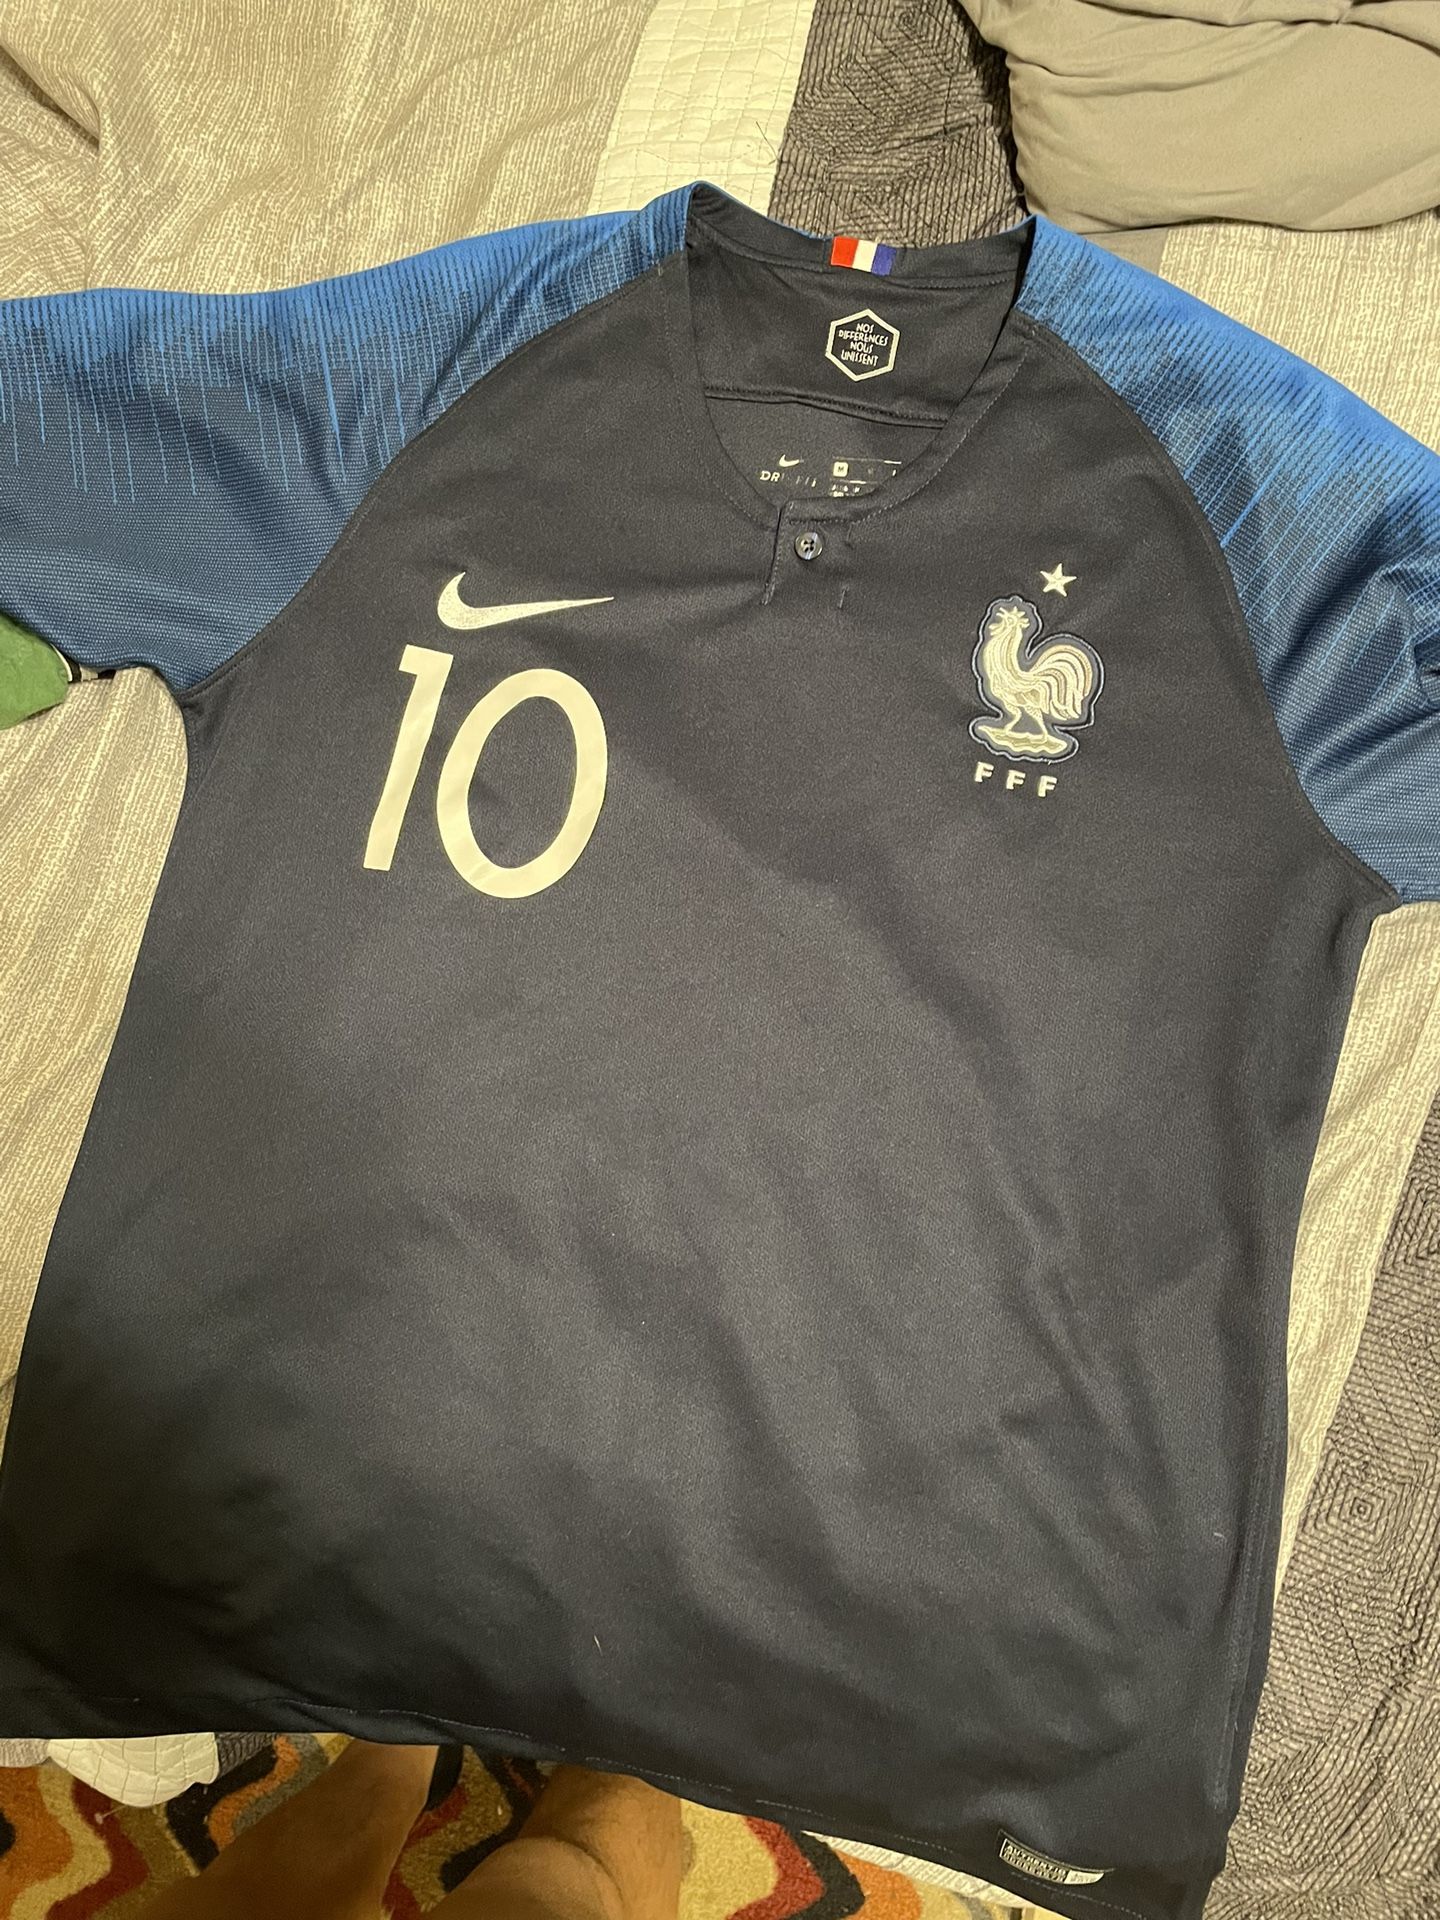 France Small Jersey Nike